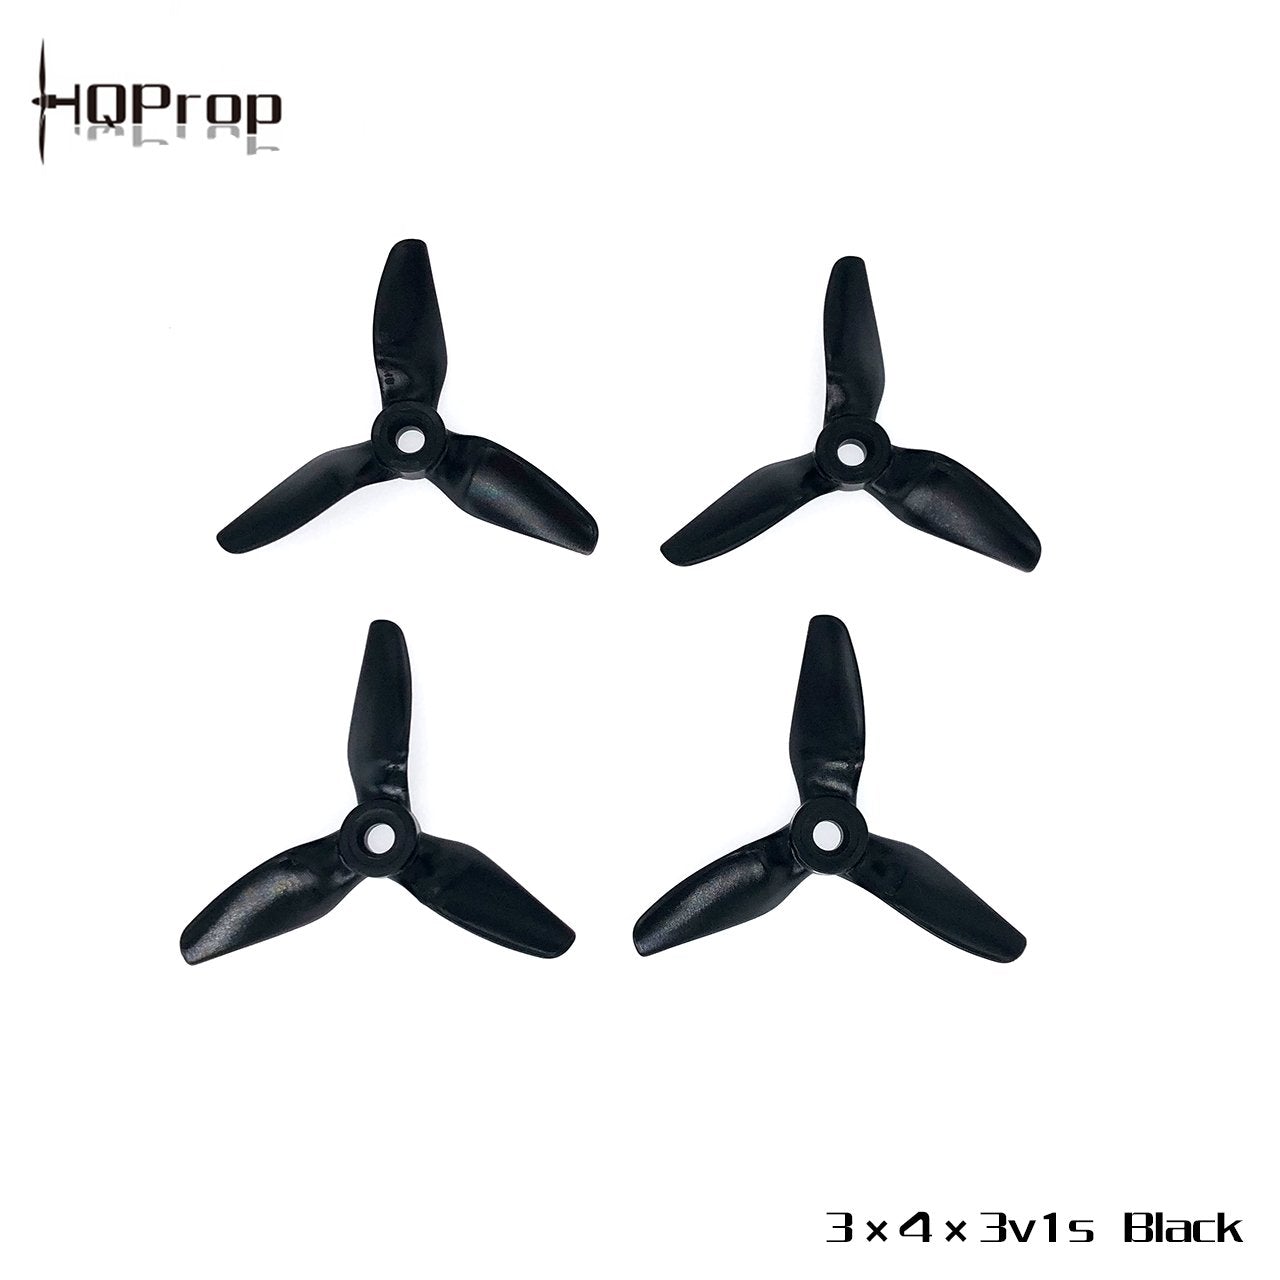 HQProp 3X4X3V1S Tri-Blade 3 inch Propellers 4 - HQProp - Drone Authority